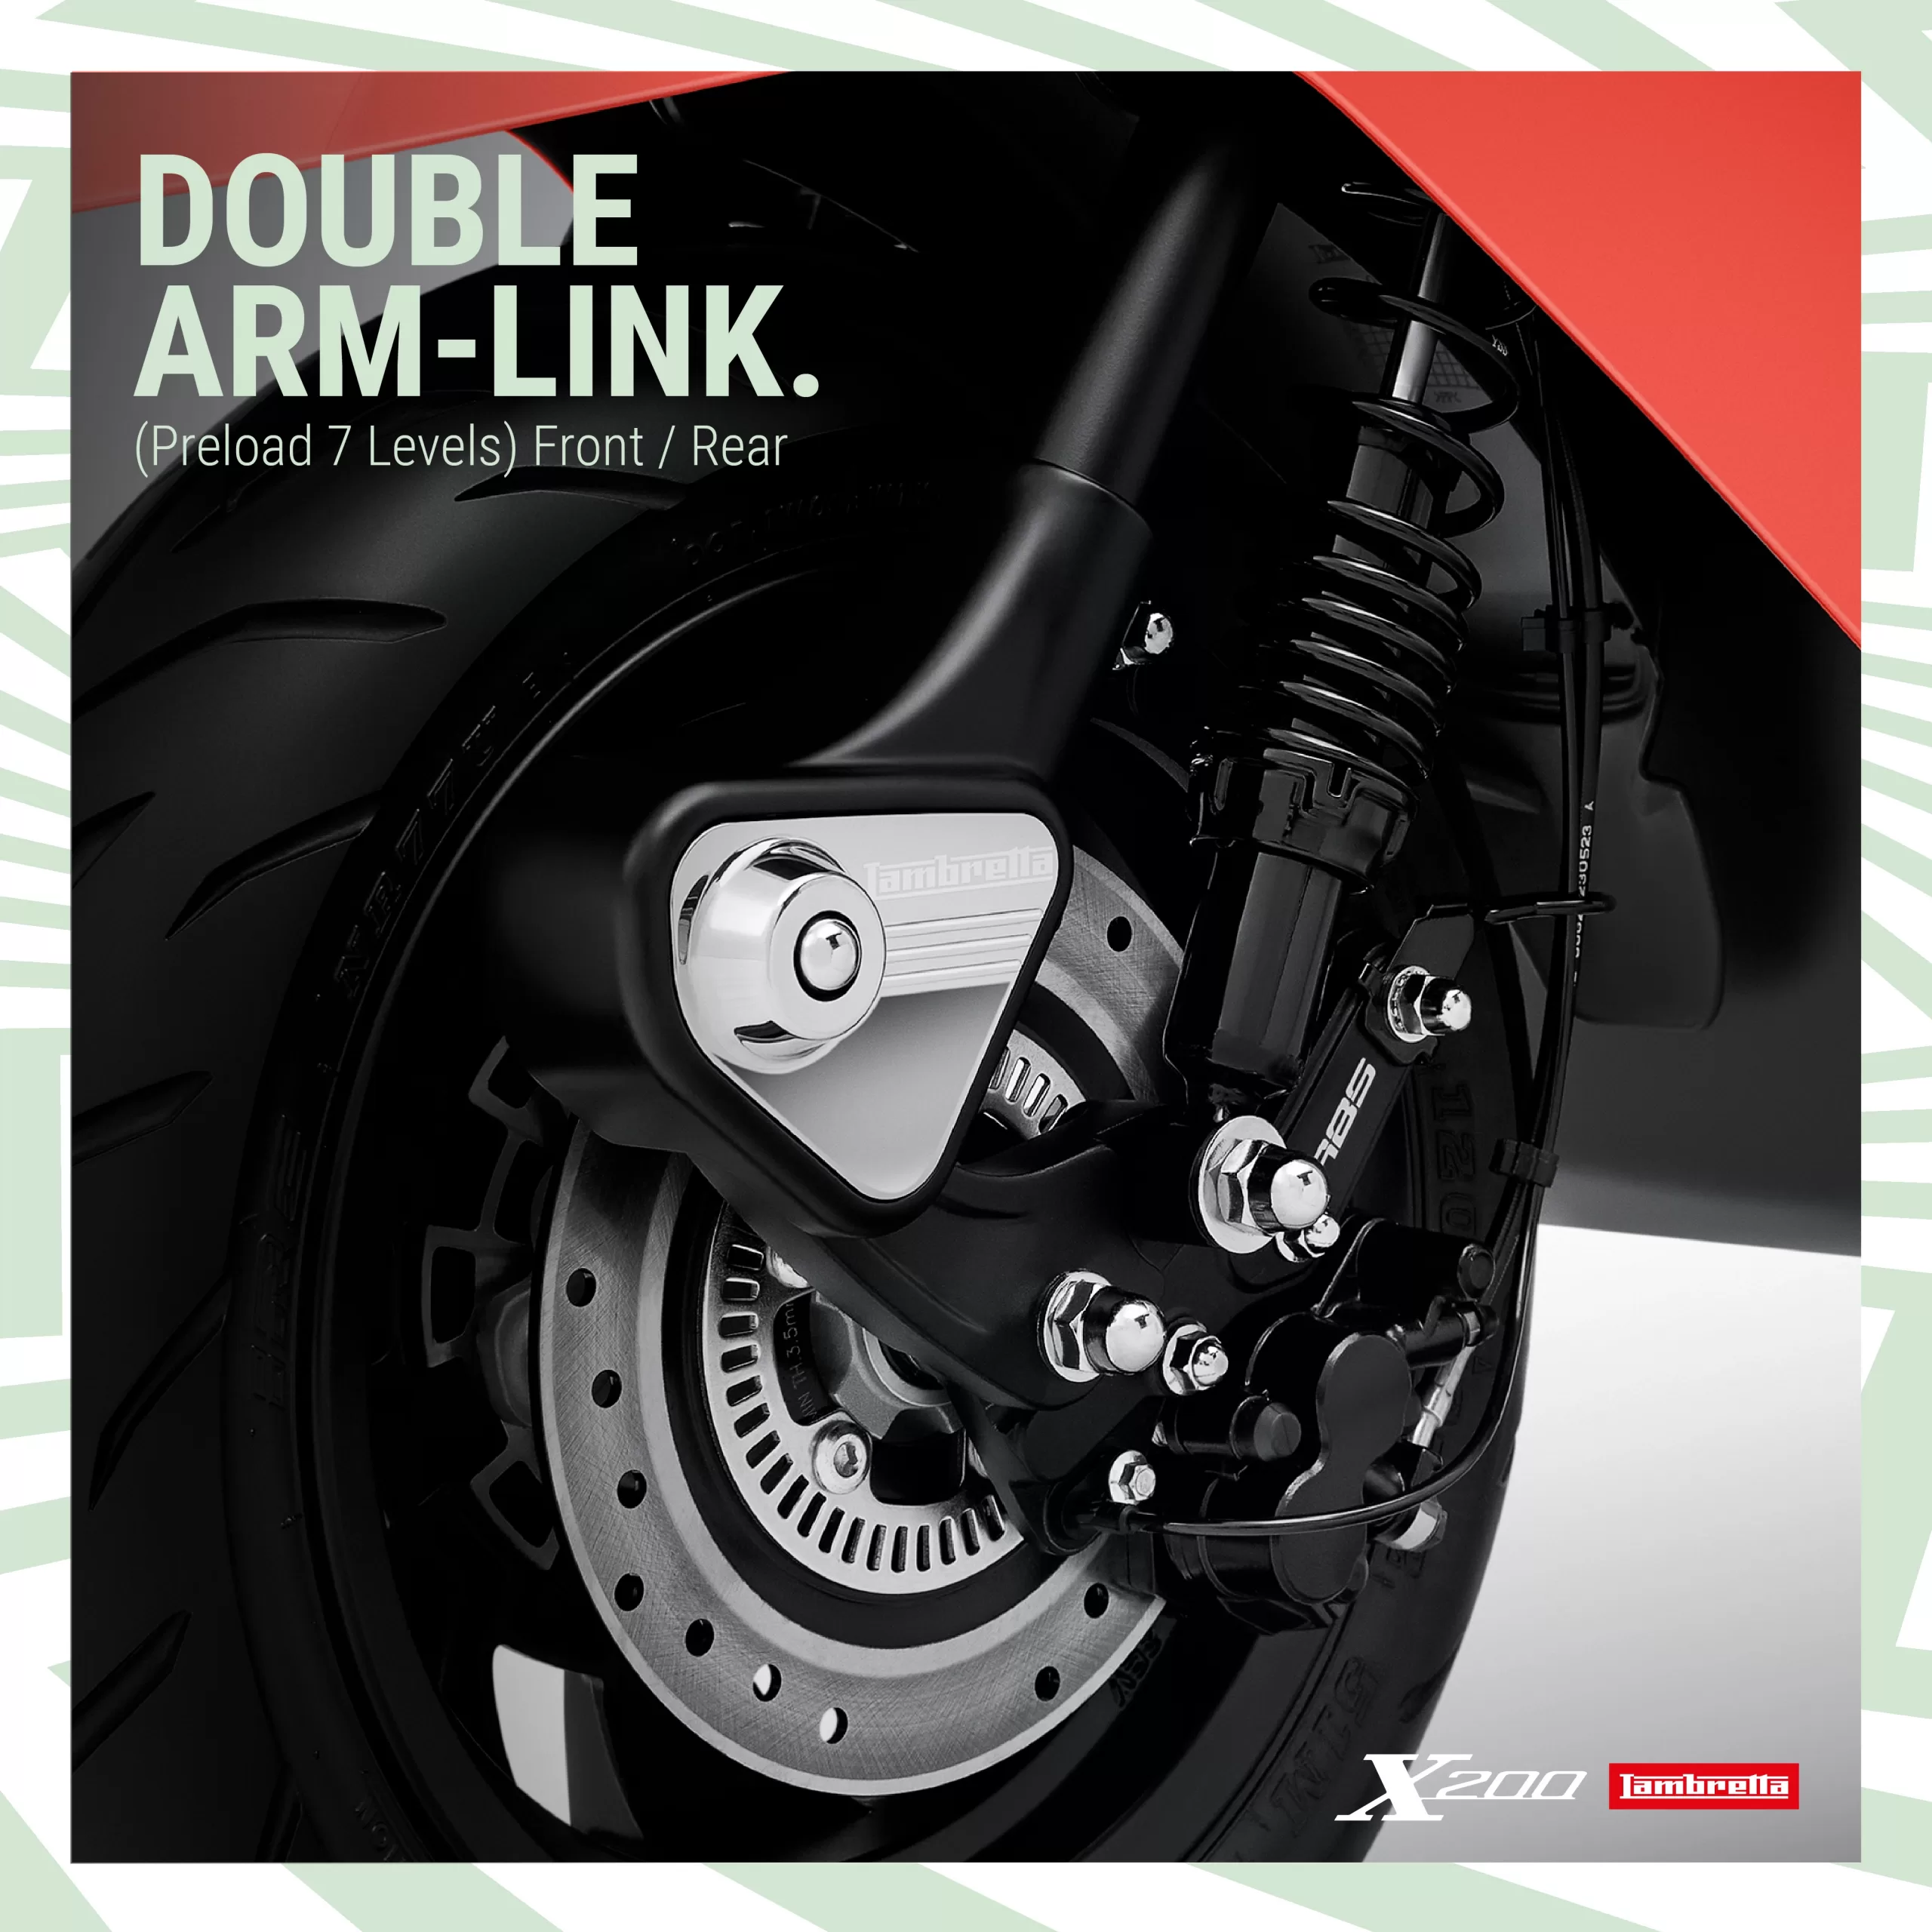 DOUBLE ARM-LINK (Preload 7 Levels) WITH DISC BRAKE (ABS)